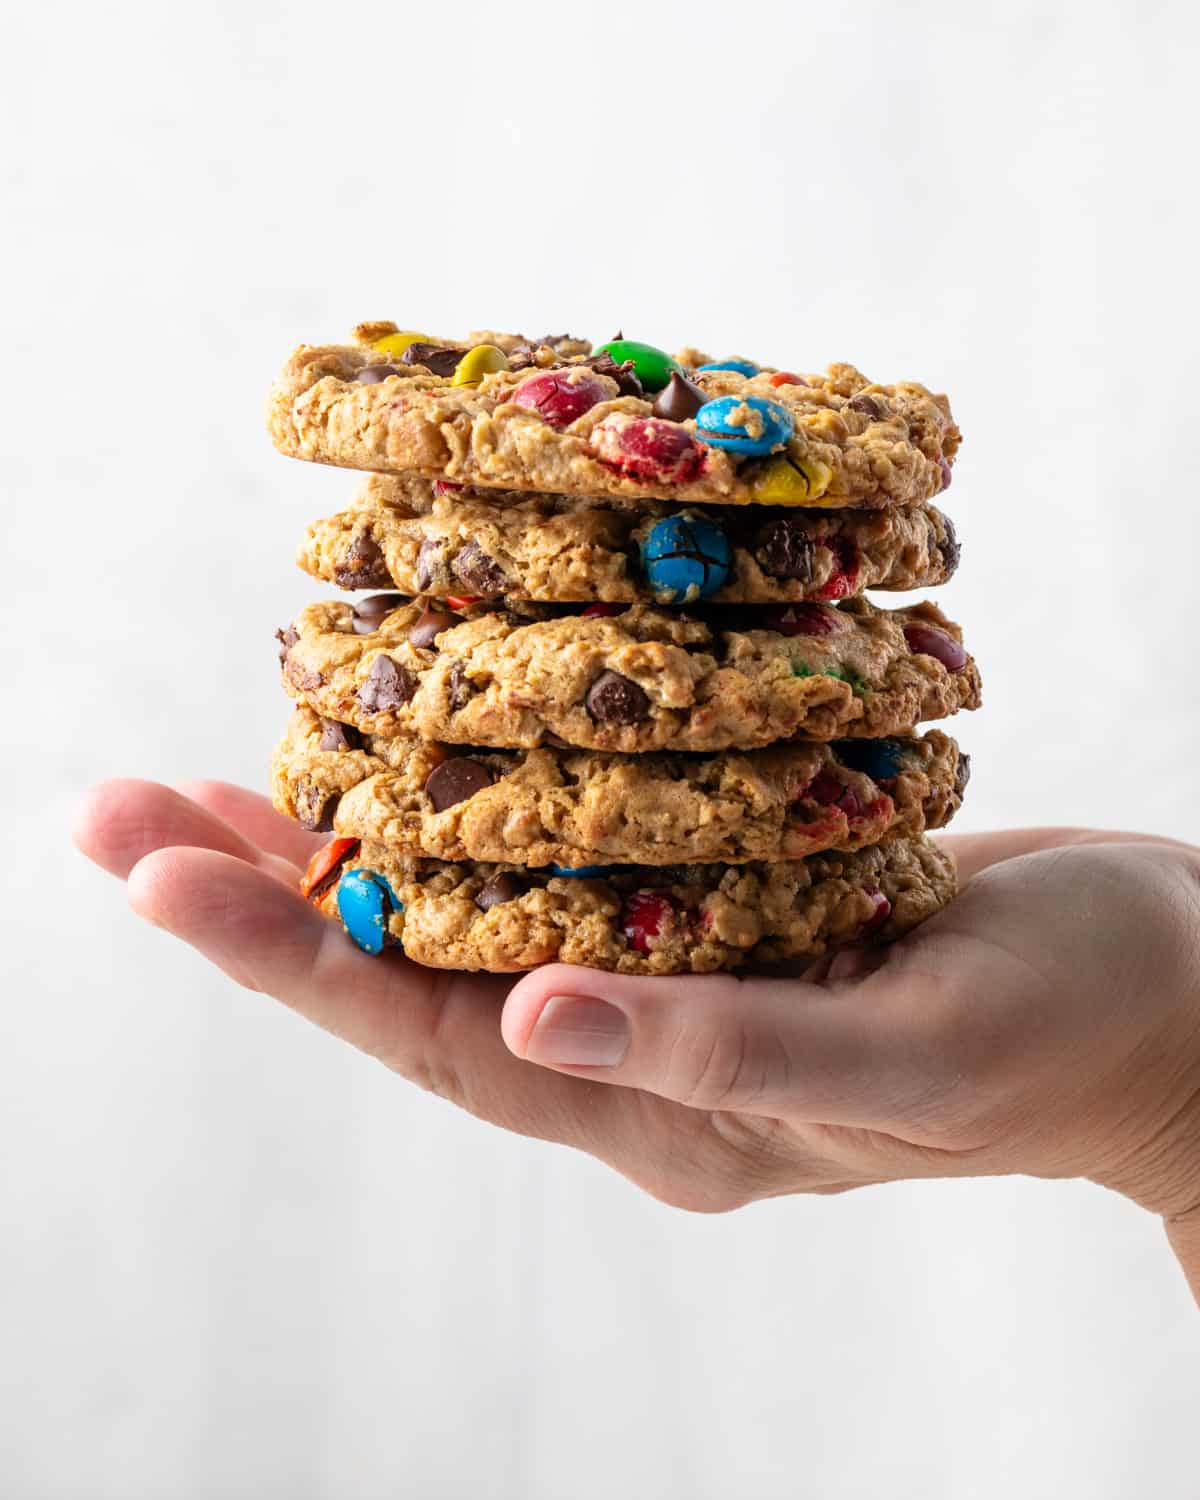 A hand holding a stack of 5 giant gluten free monster cookies. 